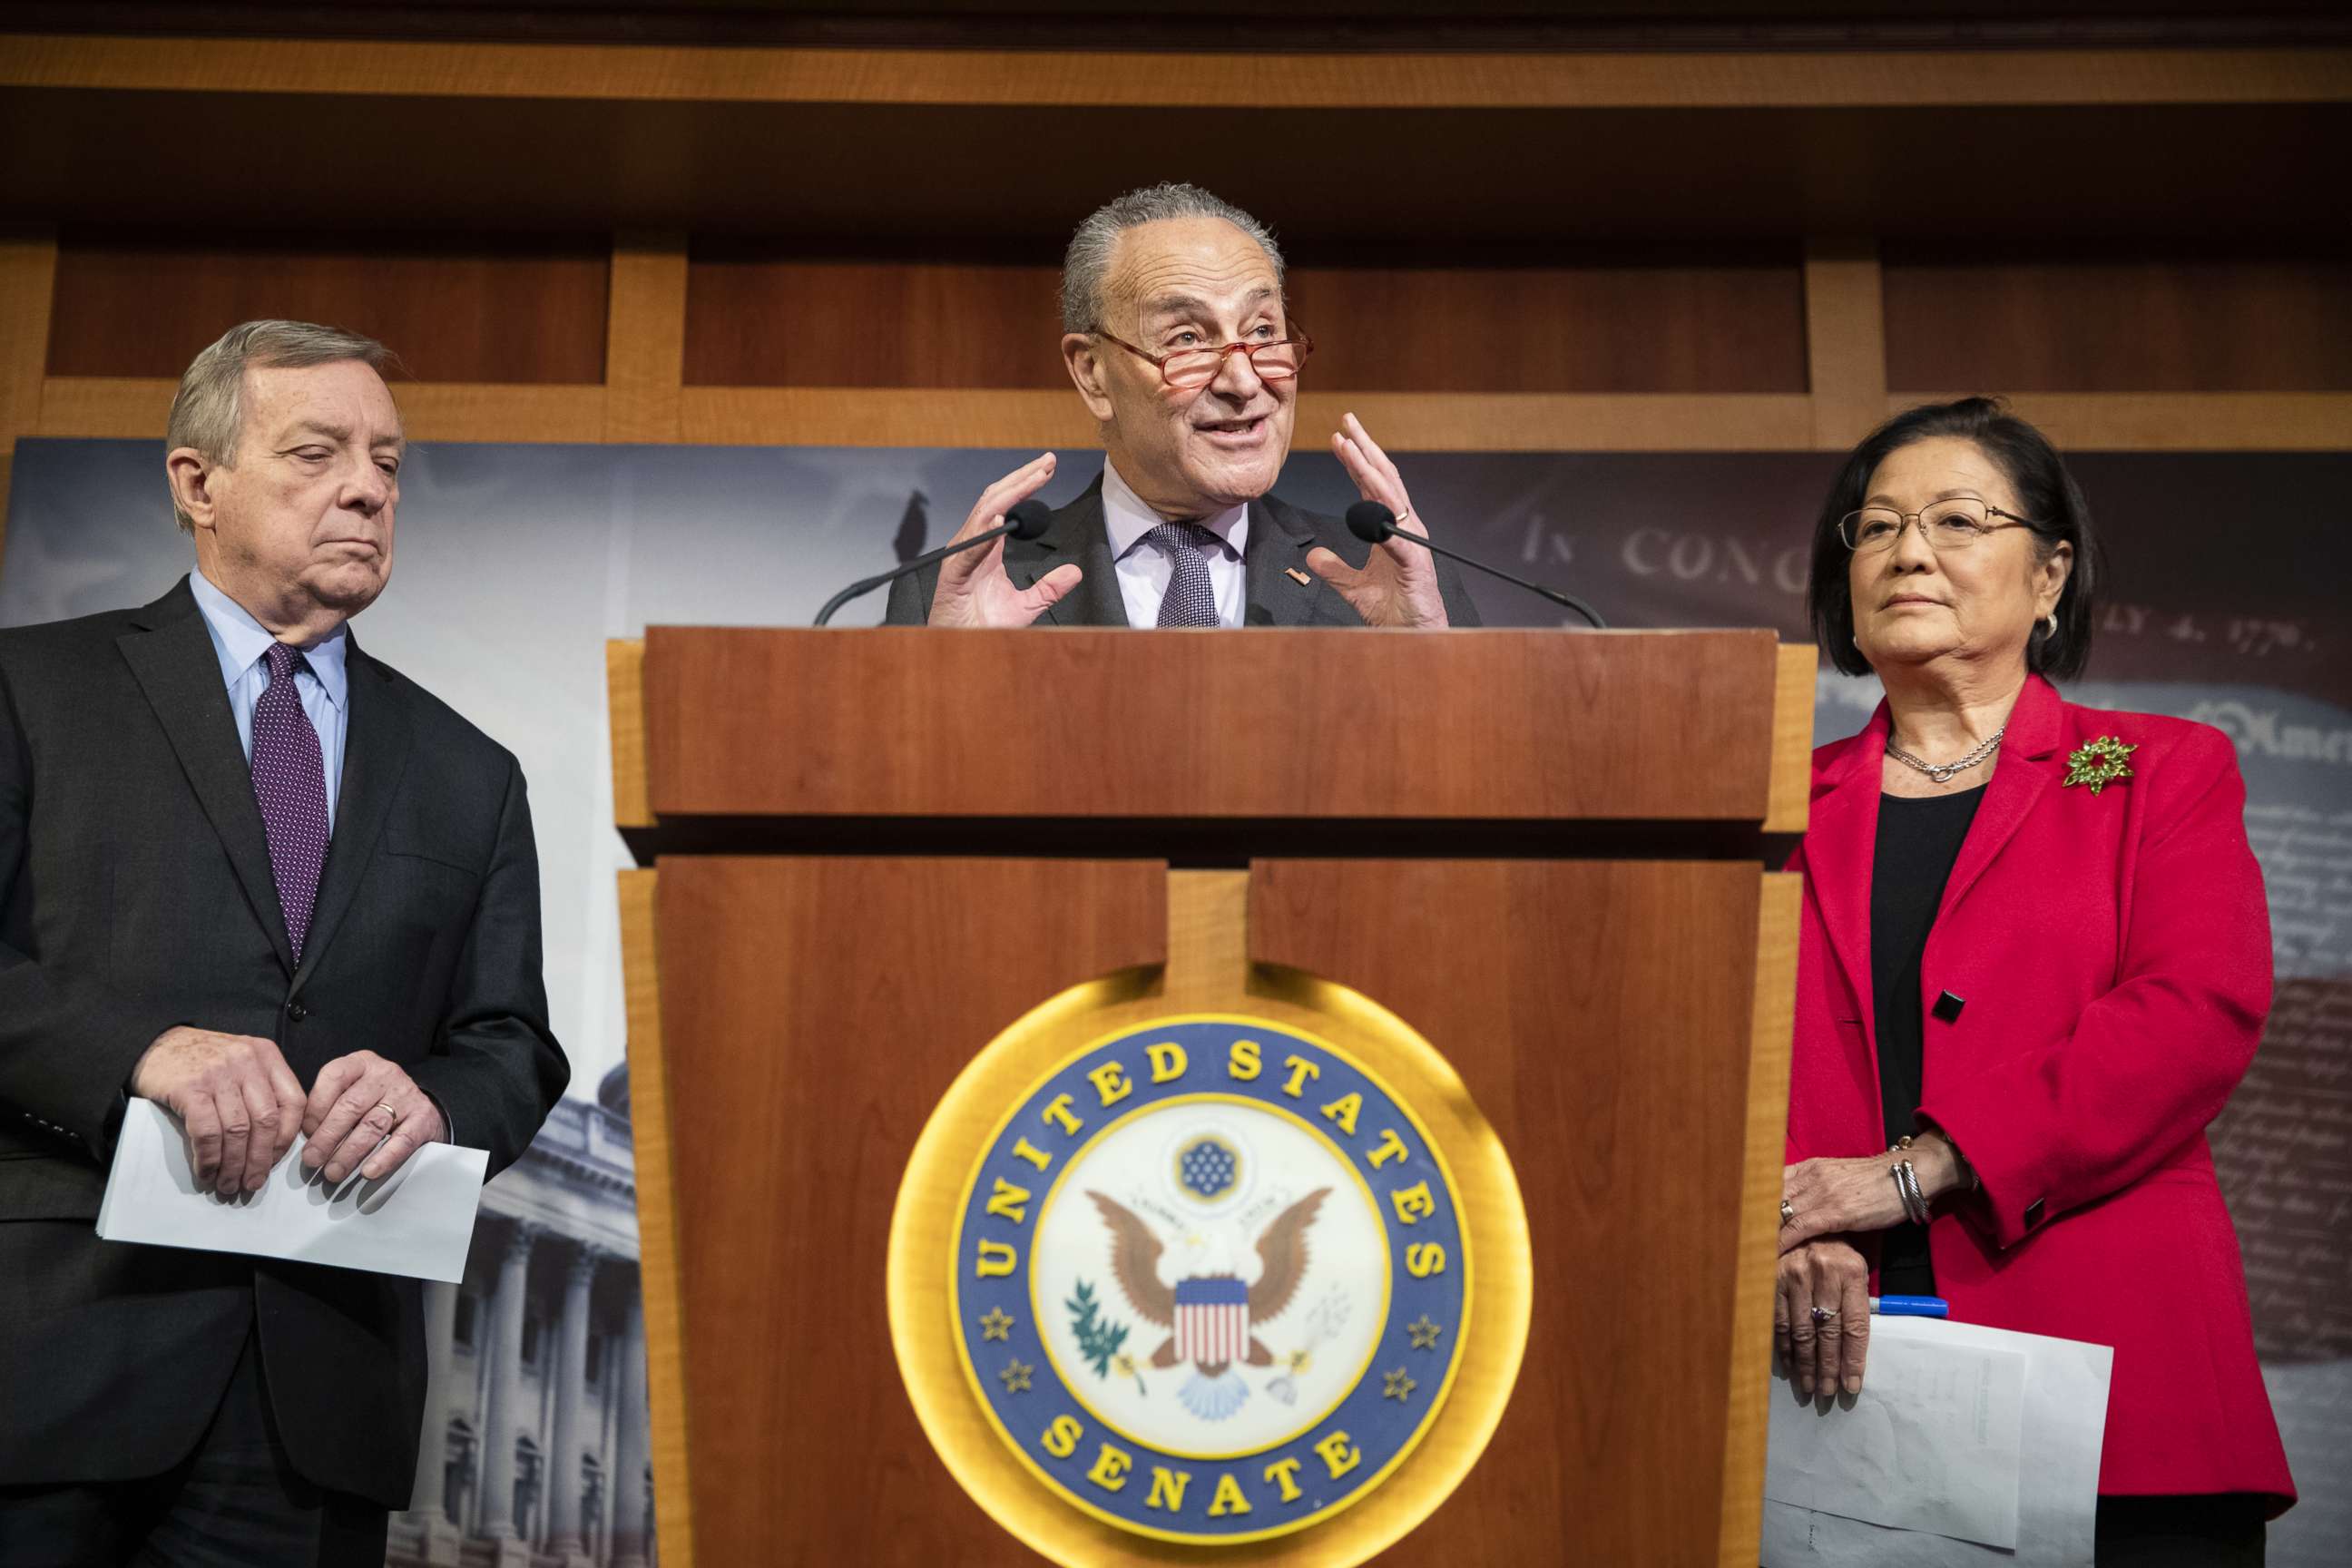 PHOTO: Senate Minority Leader Chuck Schumer speaks during a press conference with Sen. Dick Durbin and Sen. Mazie Hirono before the Senate impeachment trial of President Donald Trump starts for the day on Jan. 30, 2020, in Washington.